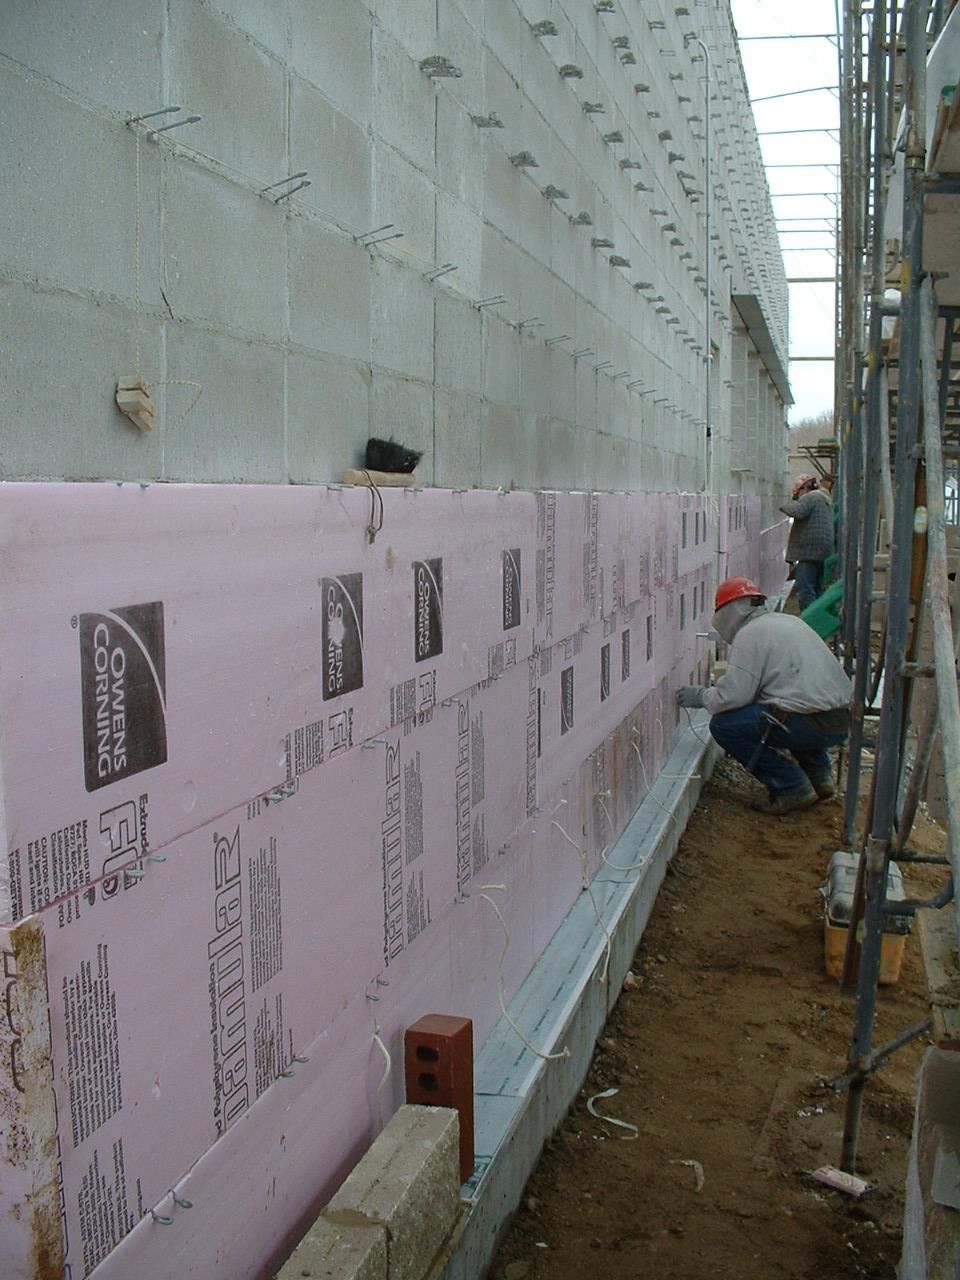 Photo 1 shows a cavity wall under construction inside a heated scaffold enclosure. The steel-reinforced concrete foundation is visible at the bottom of the wall.